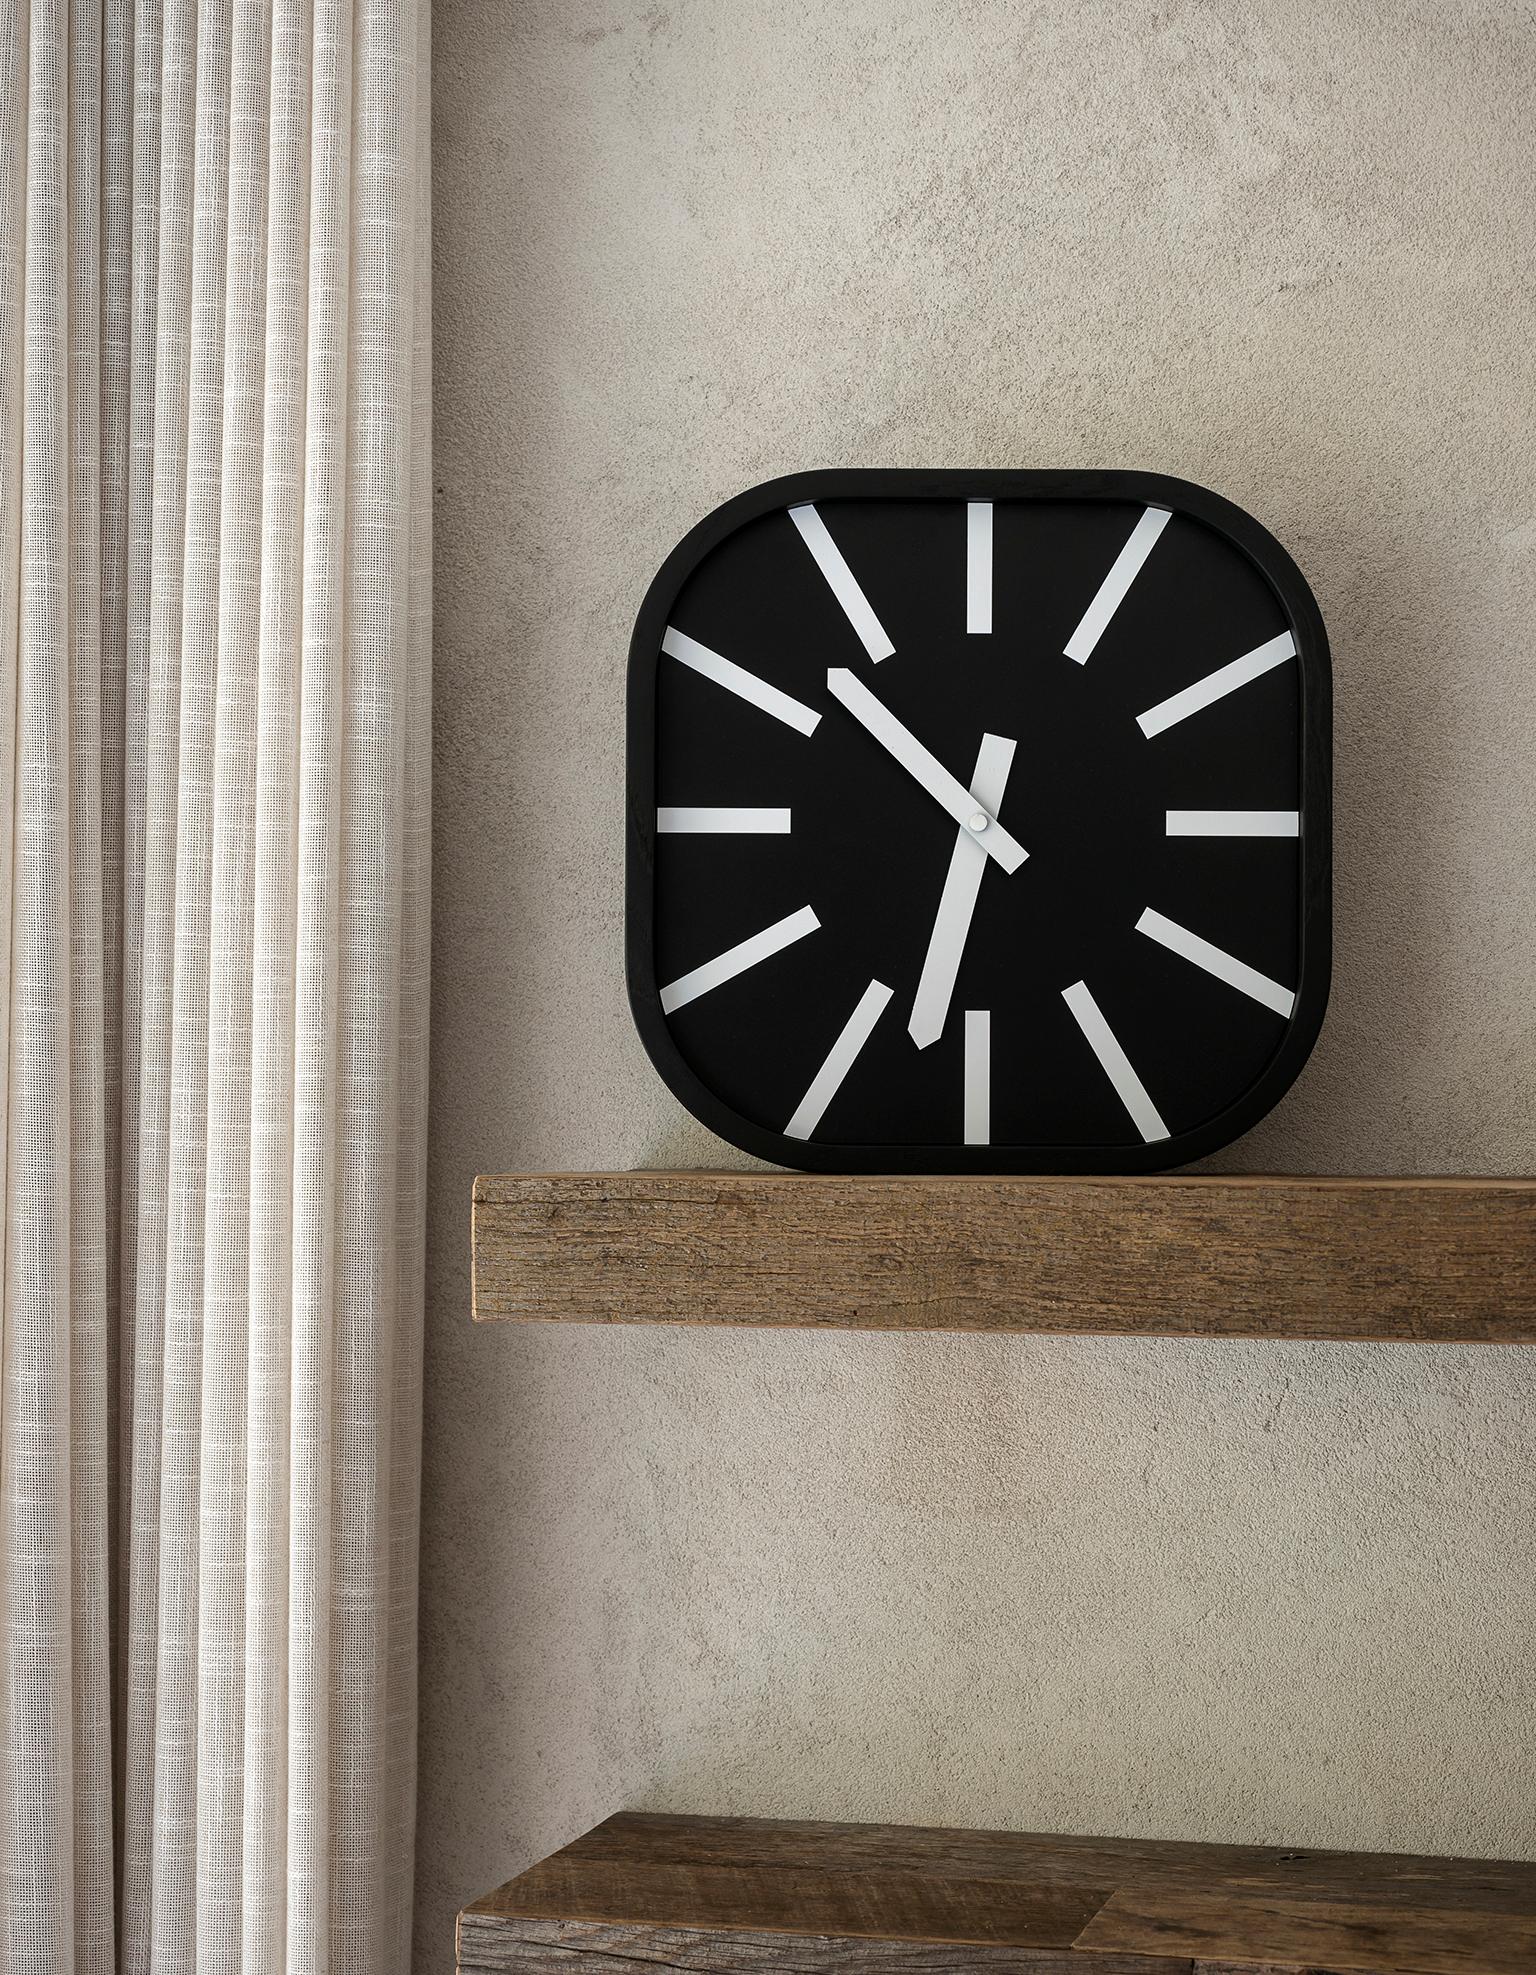 The inspiration for Mod clock comes from the design of the electronics world and the contemporary graphics of railway and underground stations. With its modern aesthetic and modular conception, it comes in two versions: round, or square with rounded